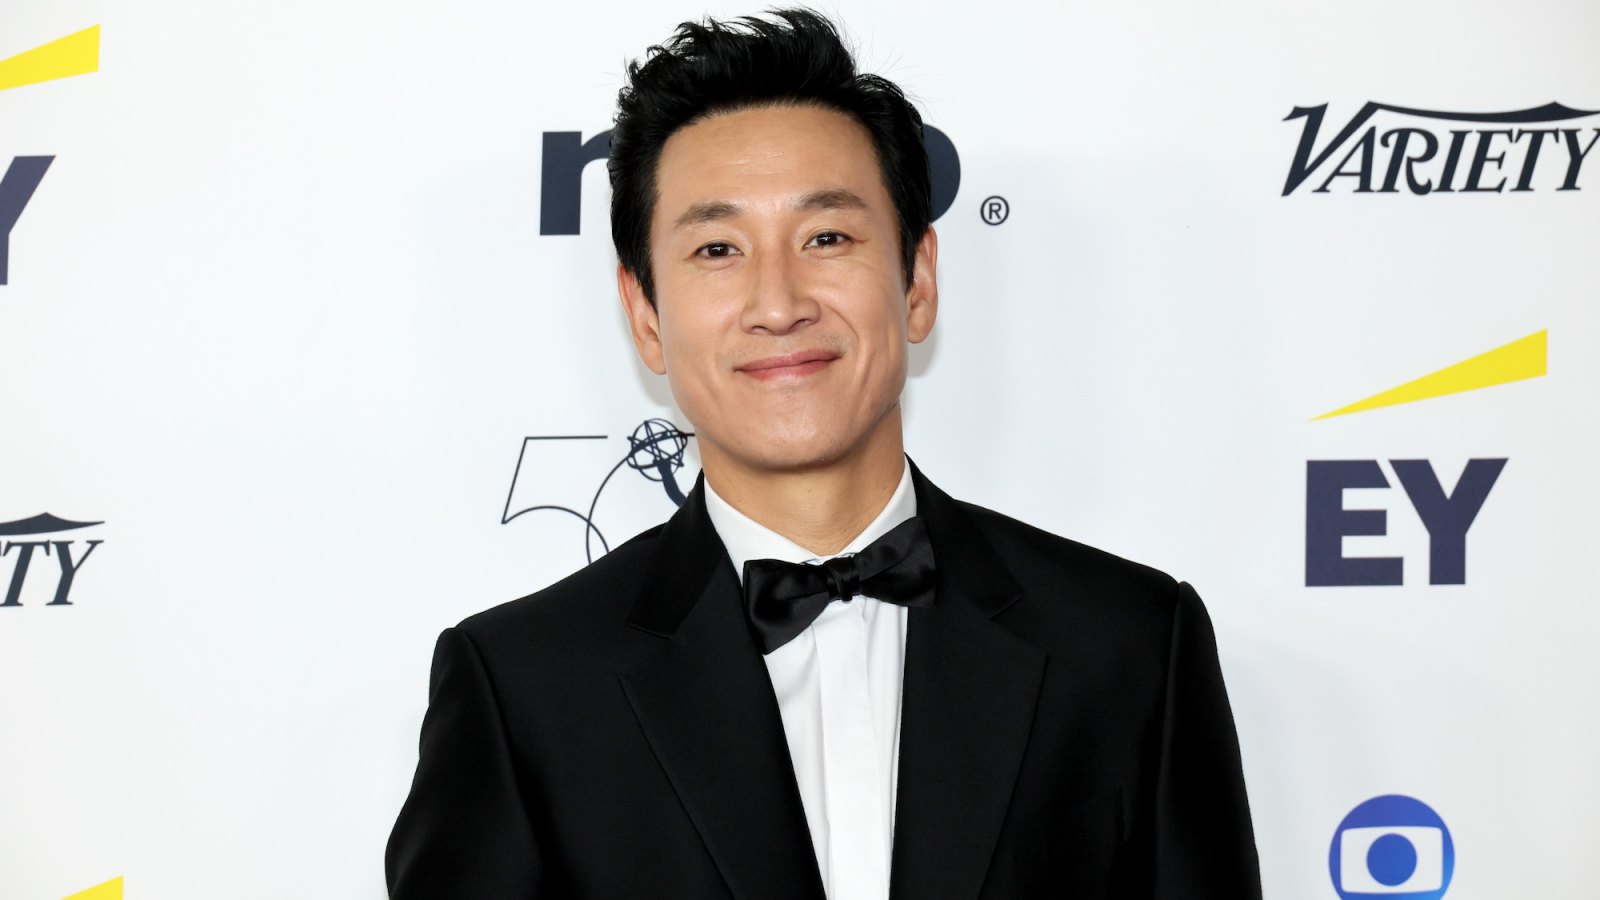 Parasite Actor Lee Sun kyun Dead At Age 48 After Apparent Suicide